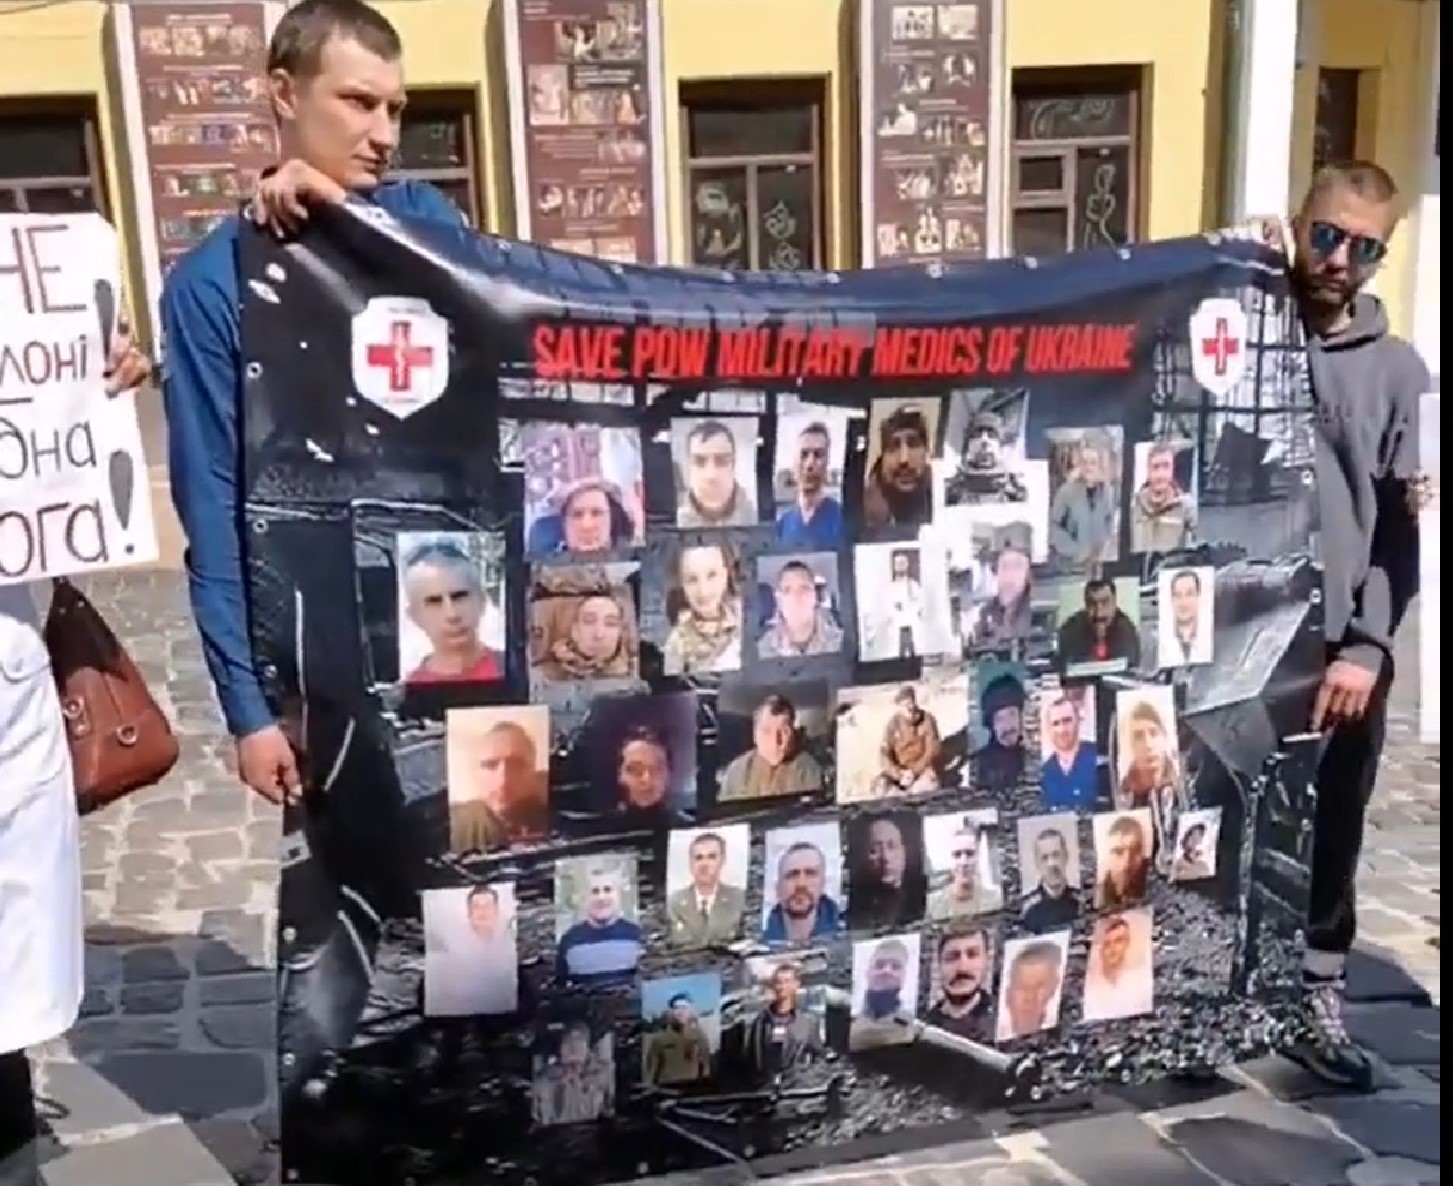 Free the medics whom Russia is holding prisoner Screenshot from a Military Medics of Ukraine video